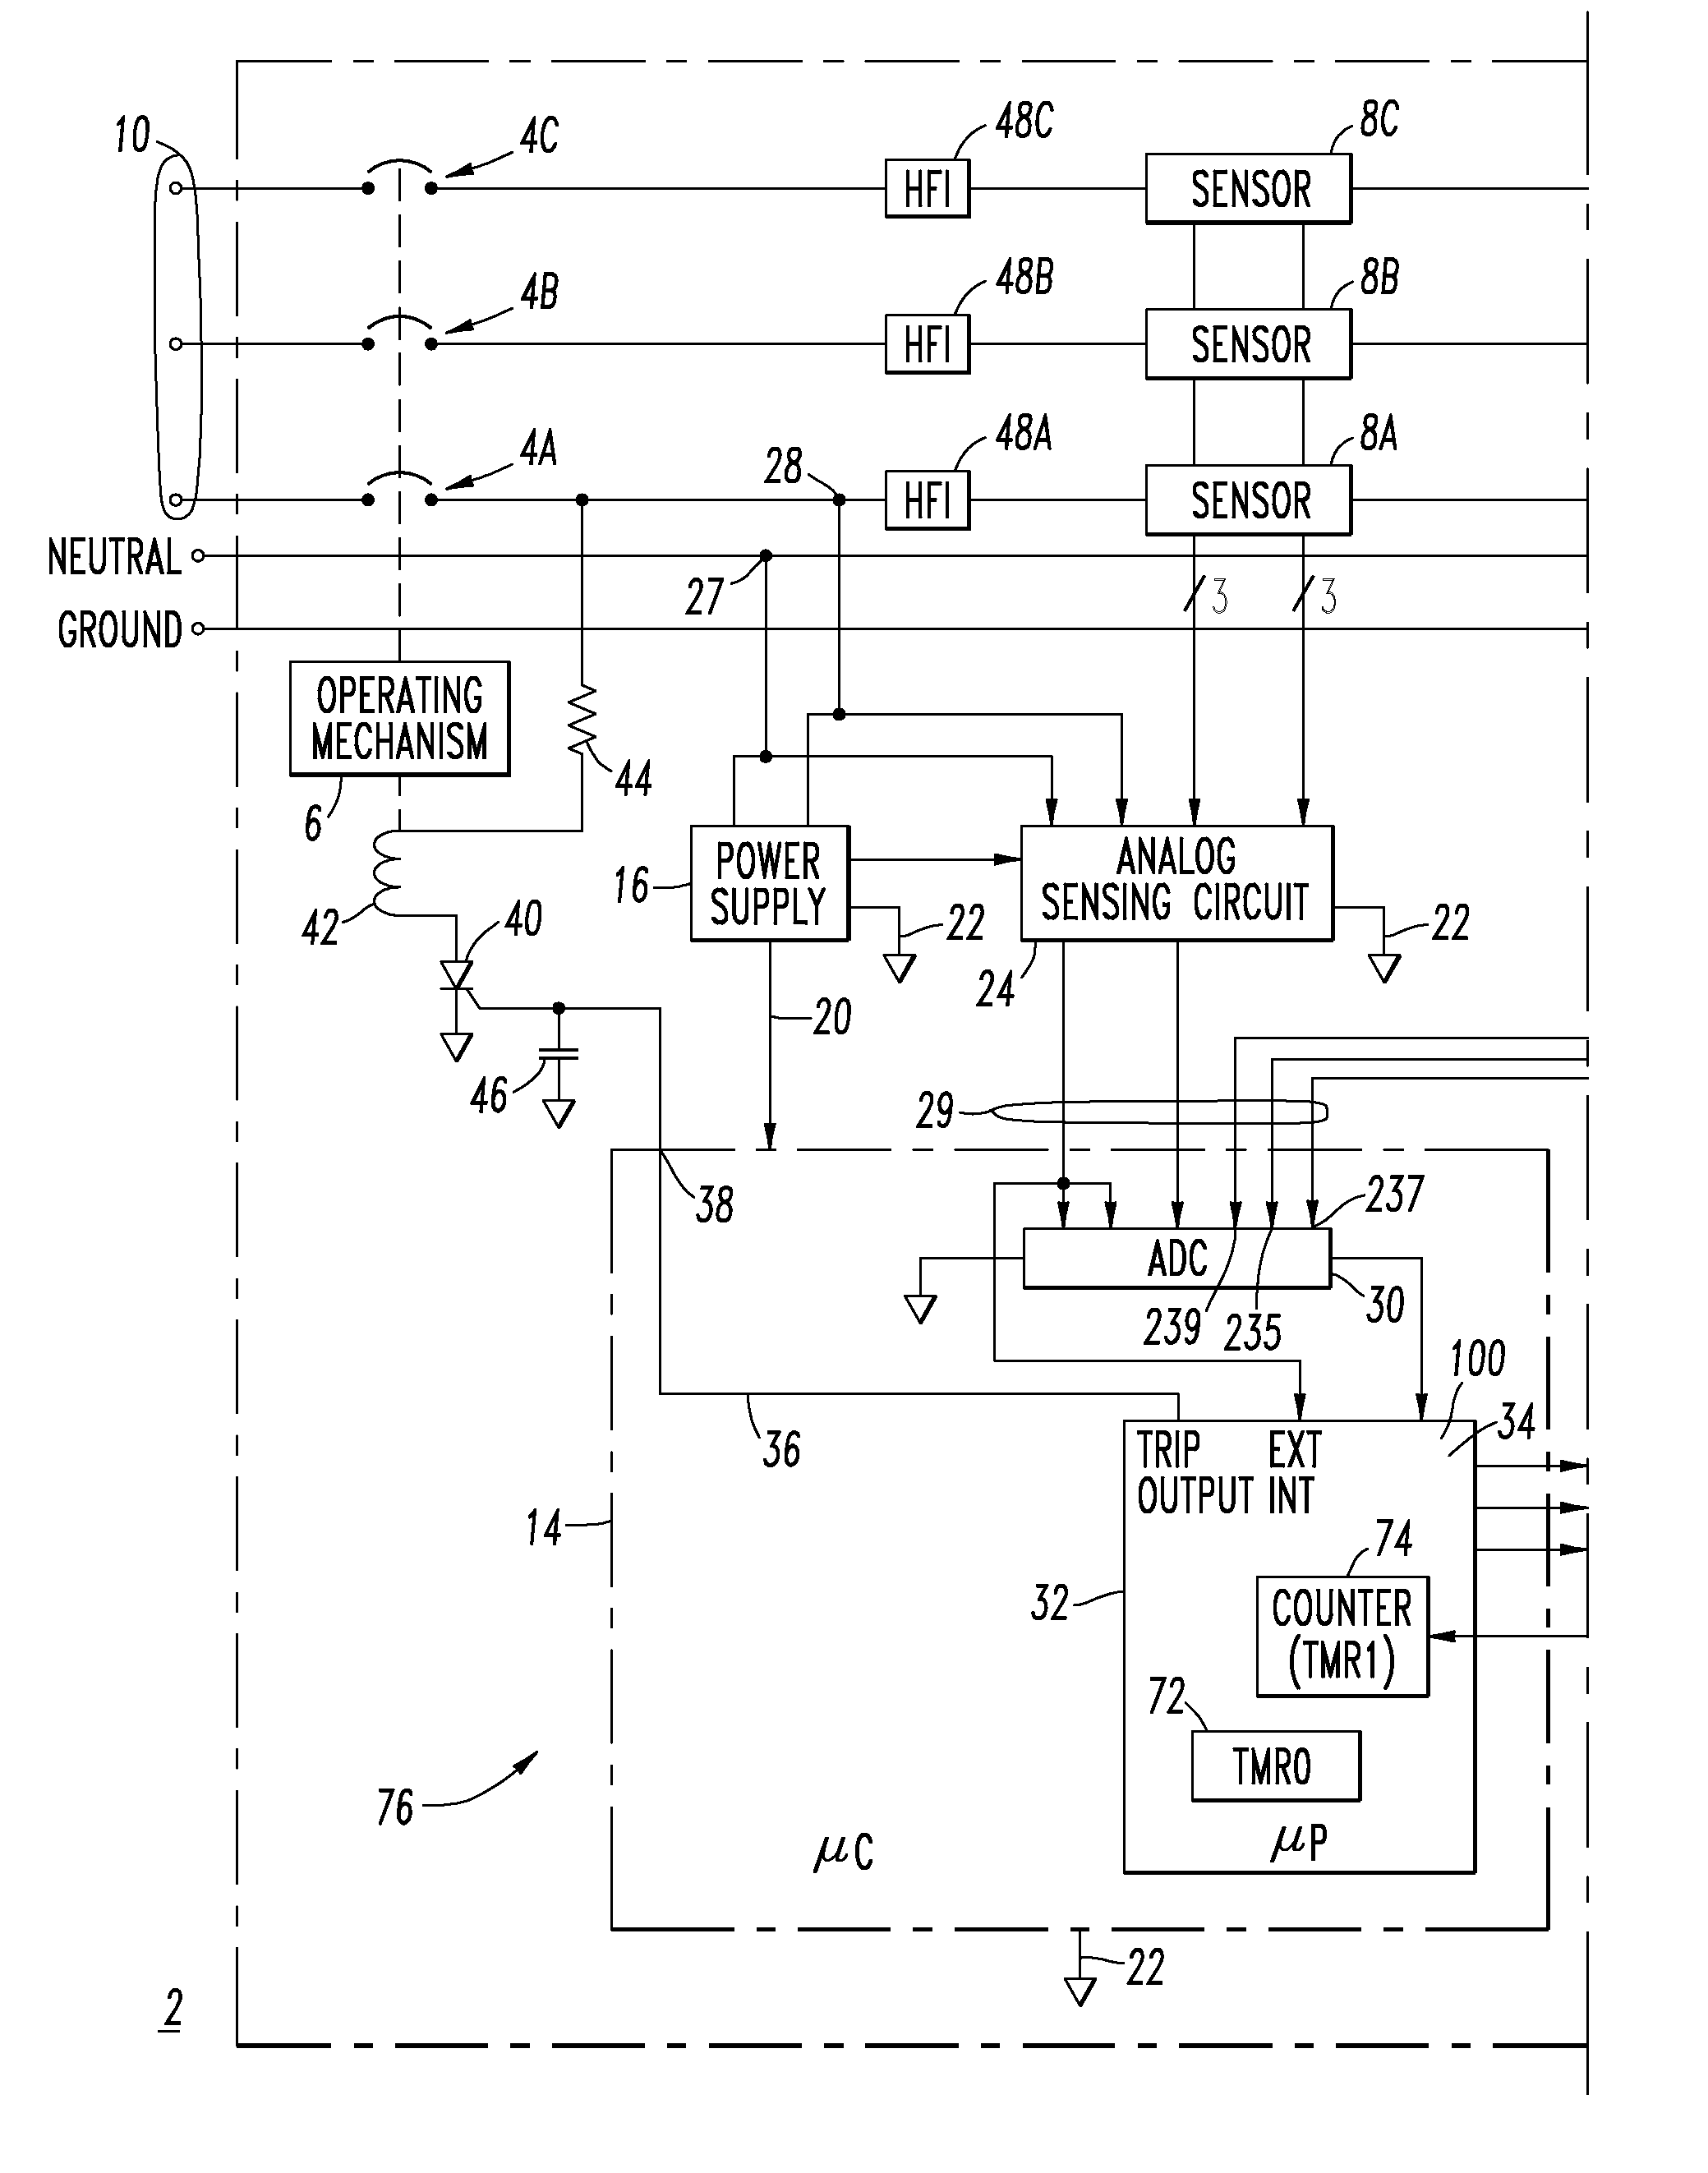 Industrial arc fault circuit interrupter and method of detecting arcing conditions